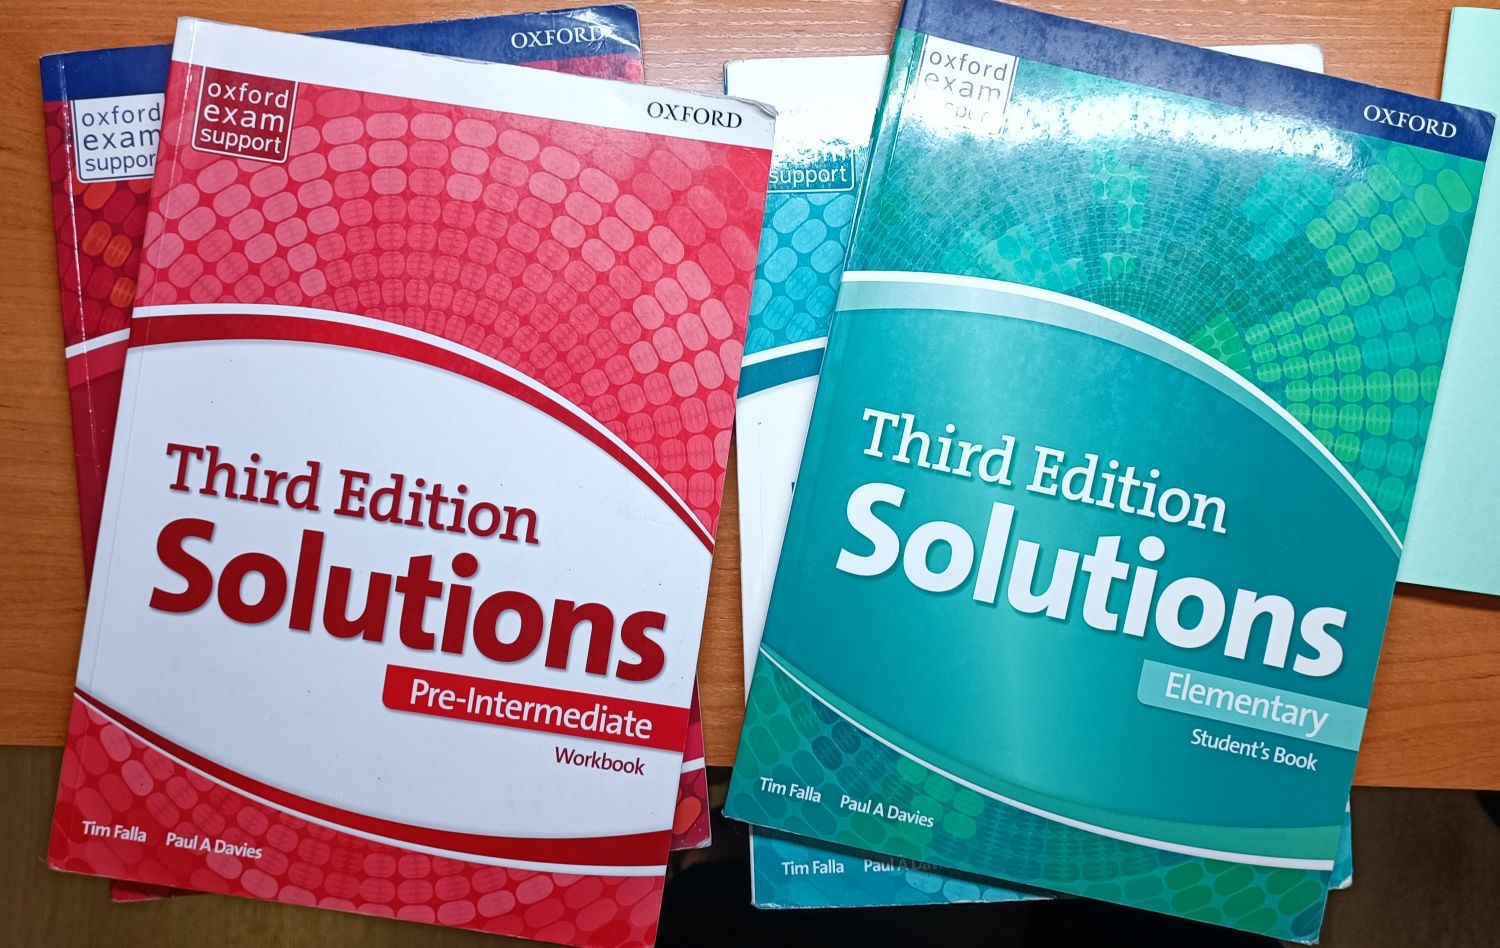 Third Edition-Solutions. A1 & A2